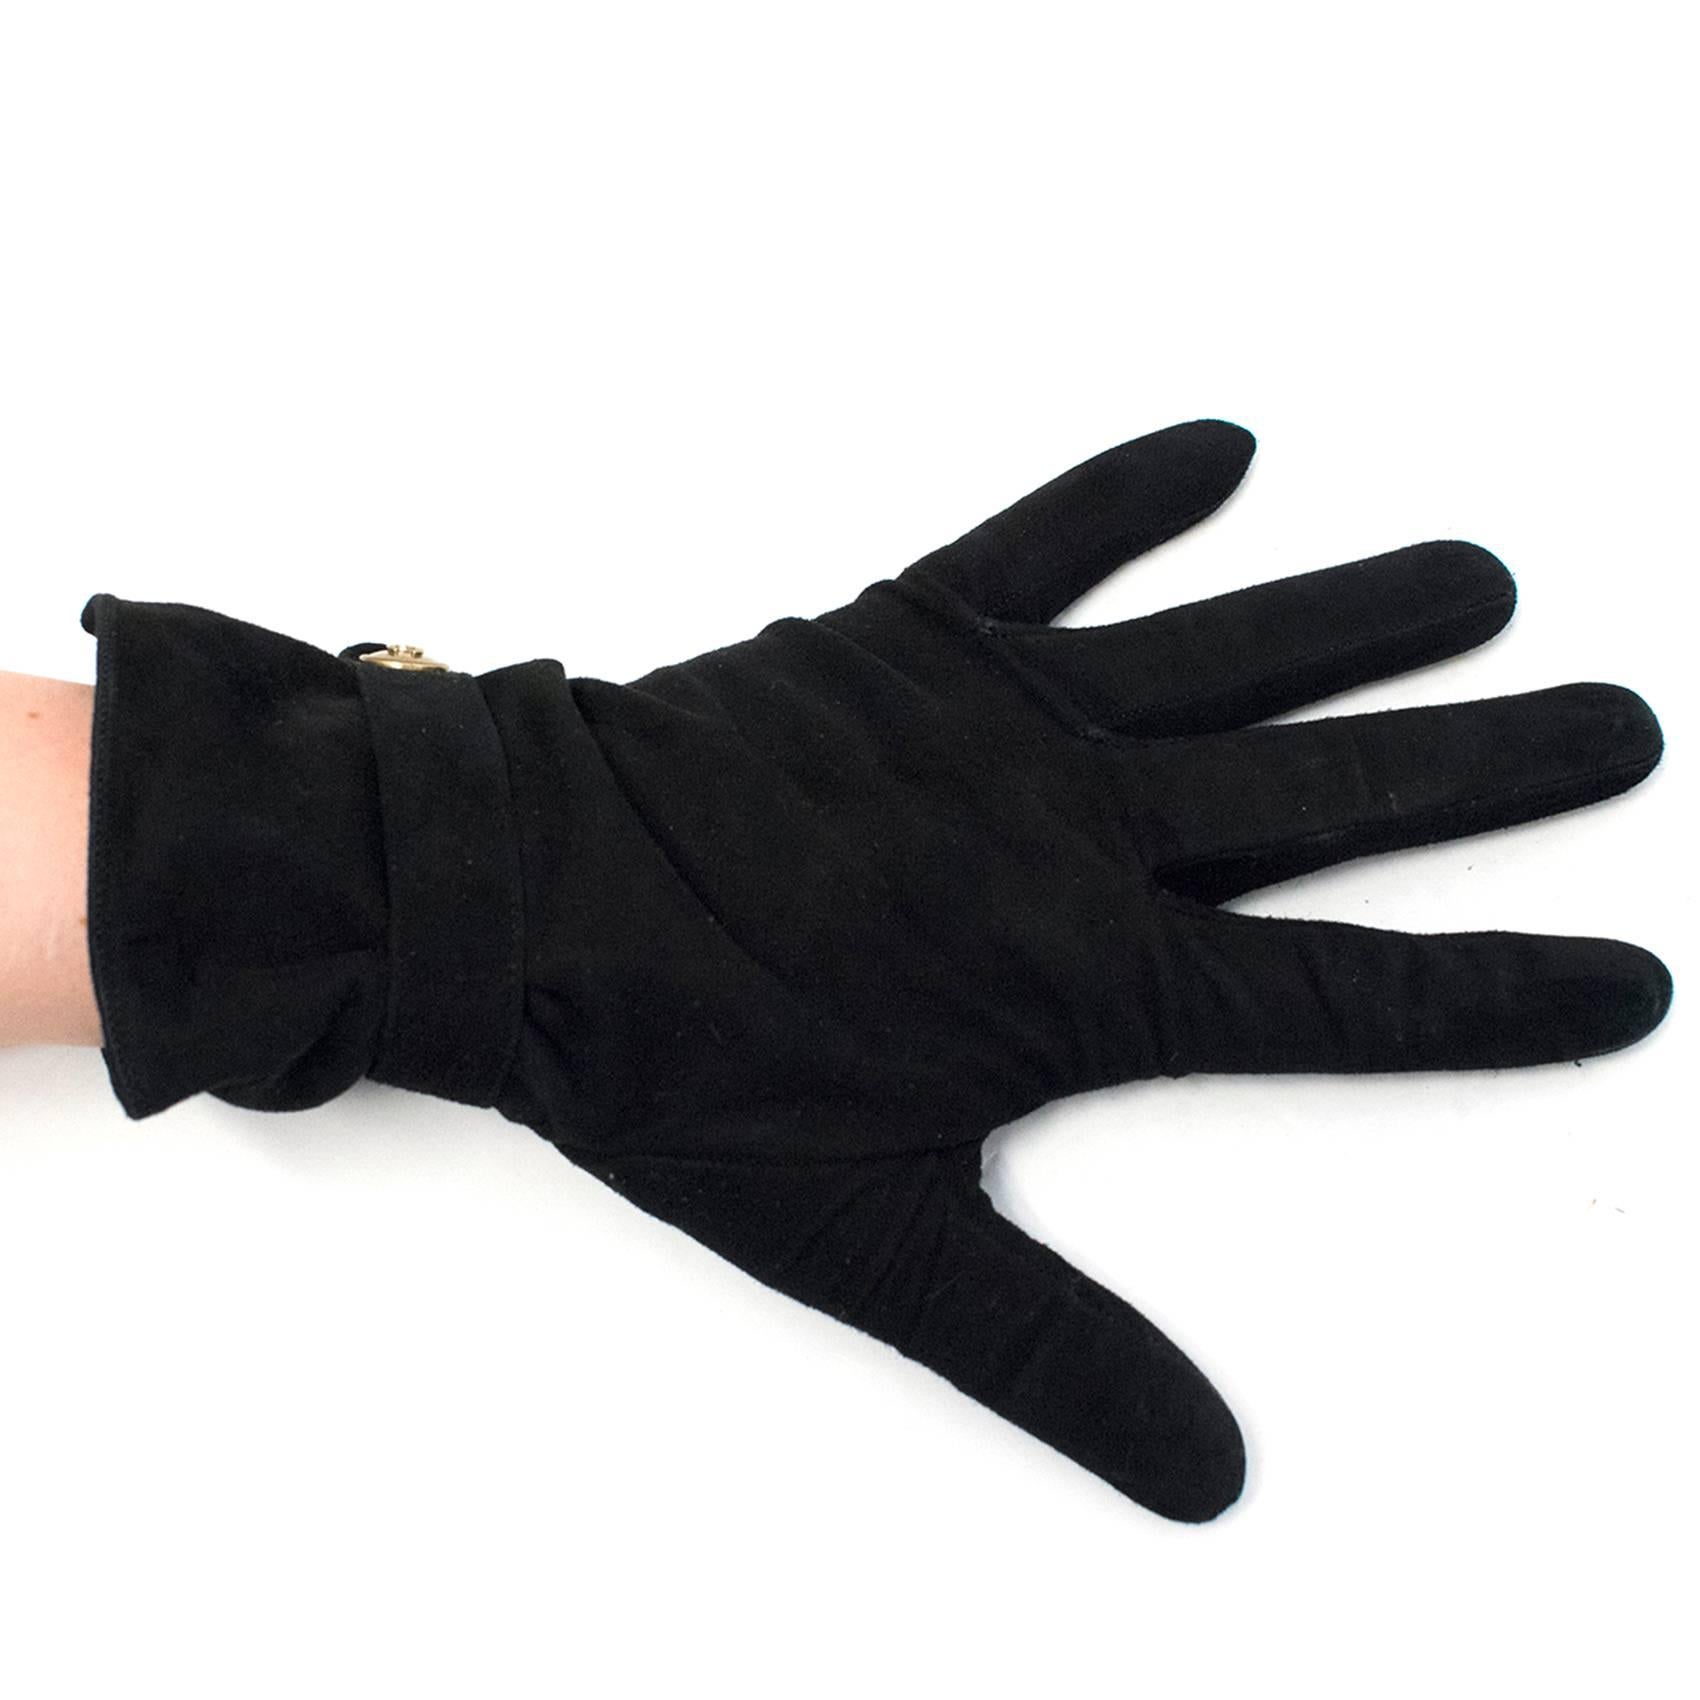 Chanel ladies black suede gloves. These gloves feature a gold Chanel button at the wrists on a suede strap. 

Condition: 9.5/10 Very minor signs of wear on the finger tips. 

Approx. 
Width: 11cm
Length: 25cm

Fabric: Suede
